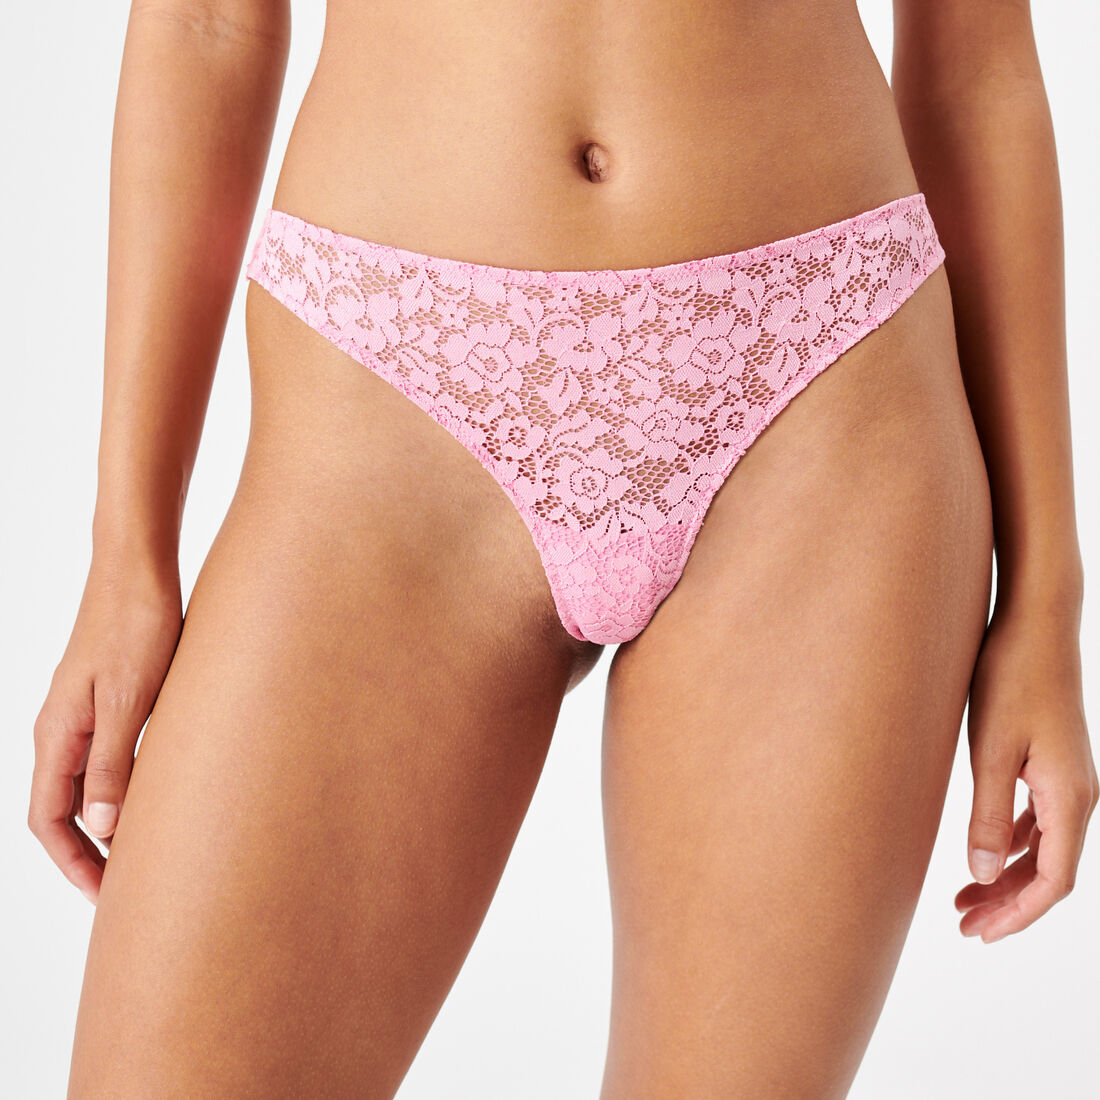 floral lace tanga briefs ;